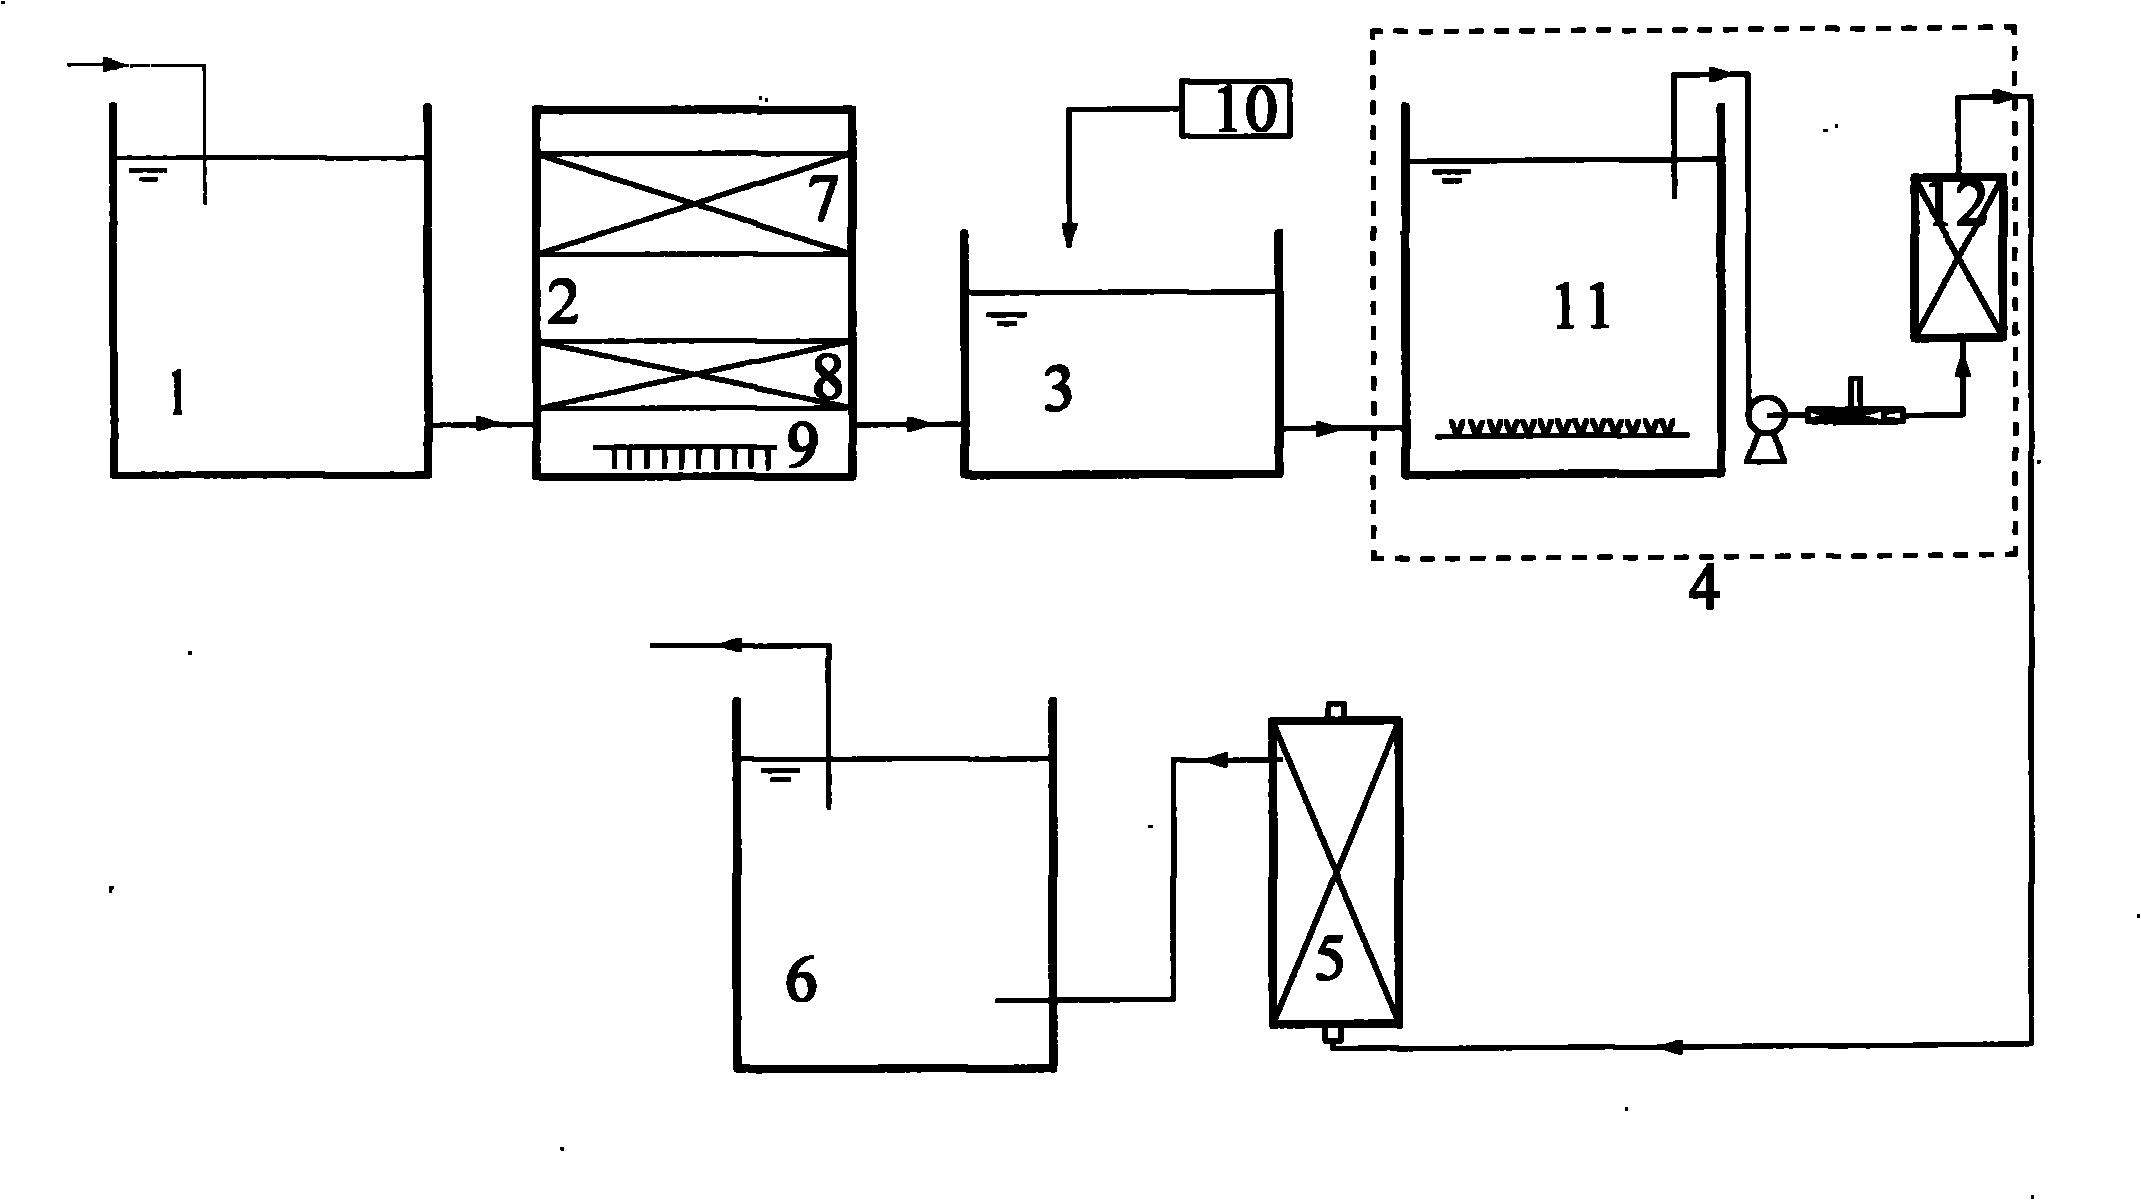 Method and device for processing high-concentration undegradable waste water by using jet flow membrane bioreactor (MBR)